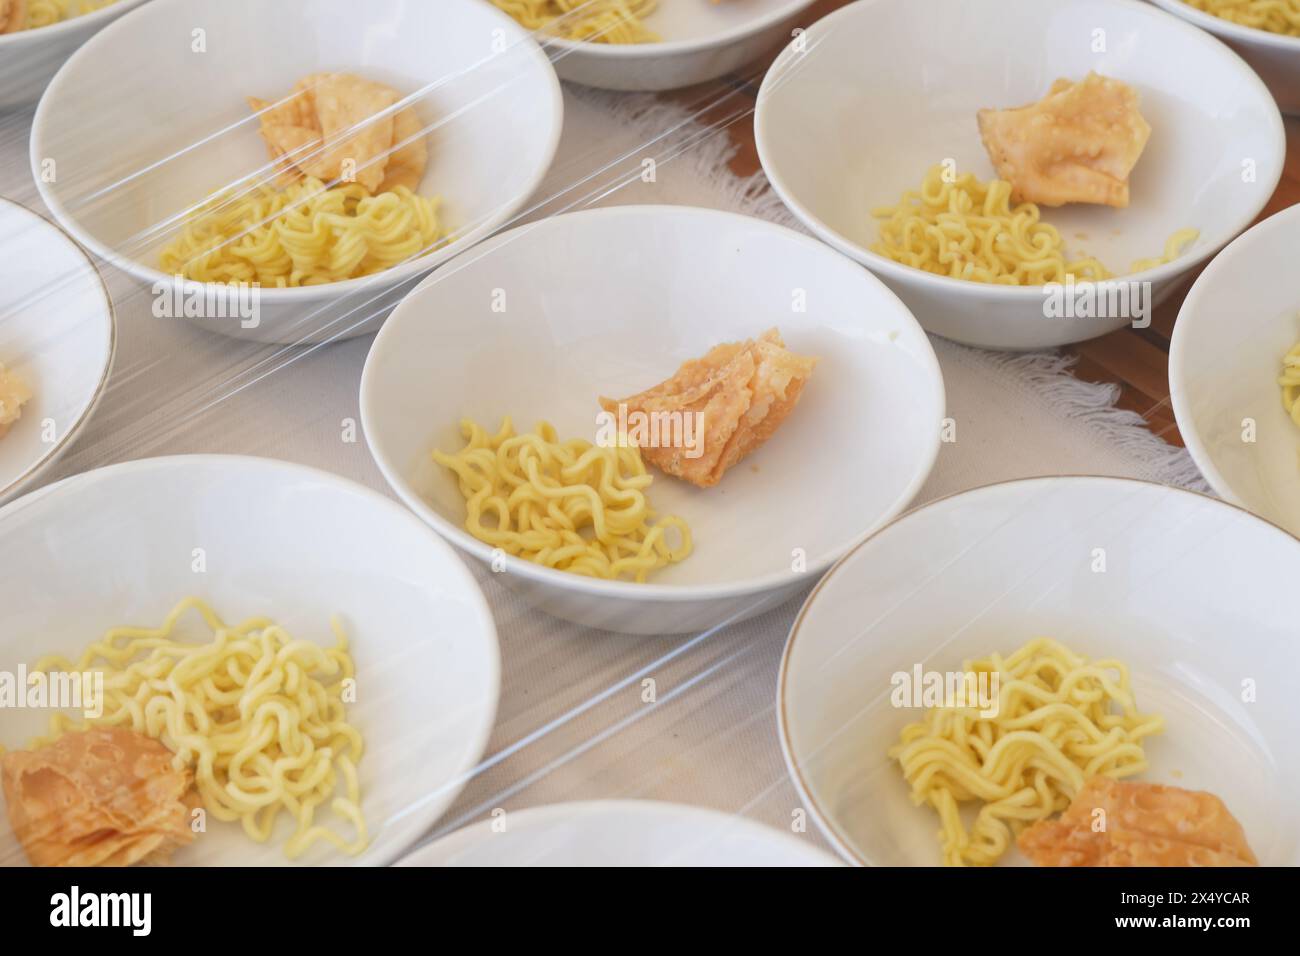 Several white bowls containing yellow noodles, fried foods and meatballs without sauce on the table Stock Photo